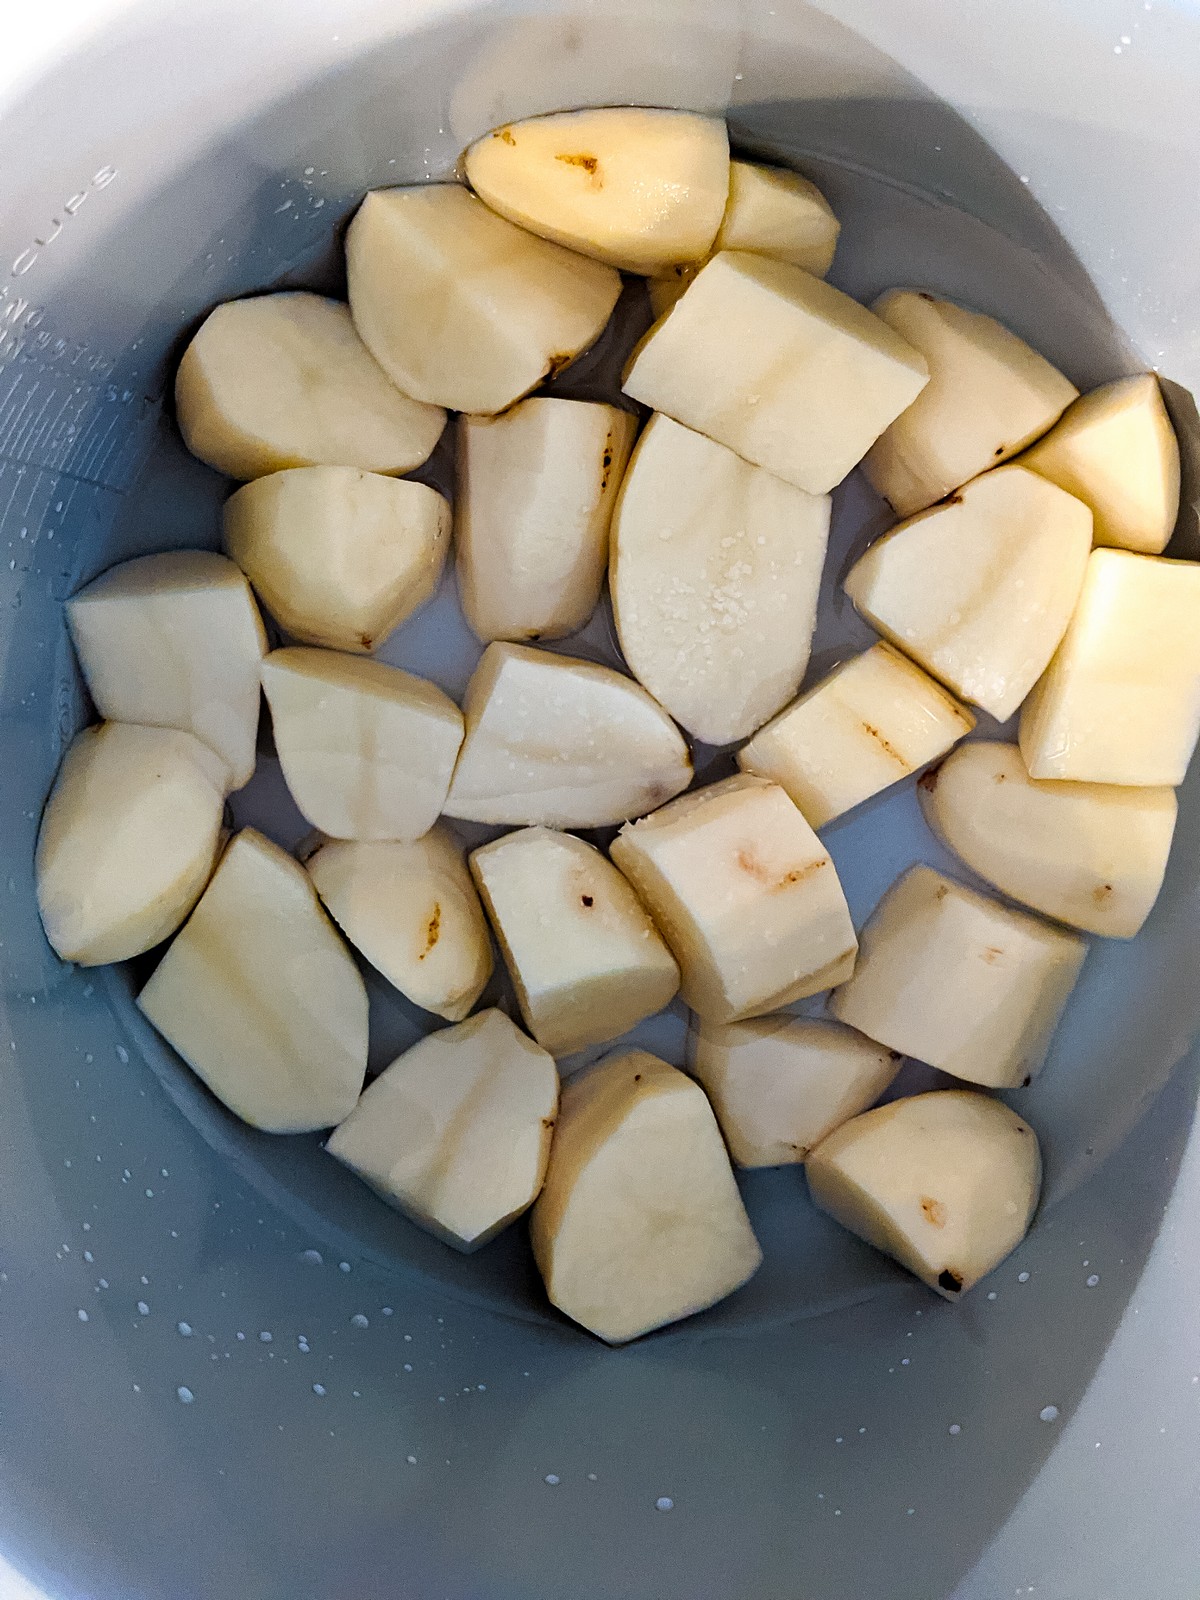 russet potatoes peeled and cut and in pressure cooker